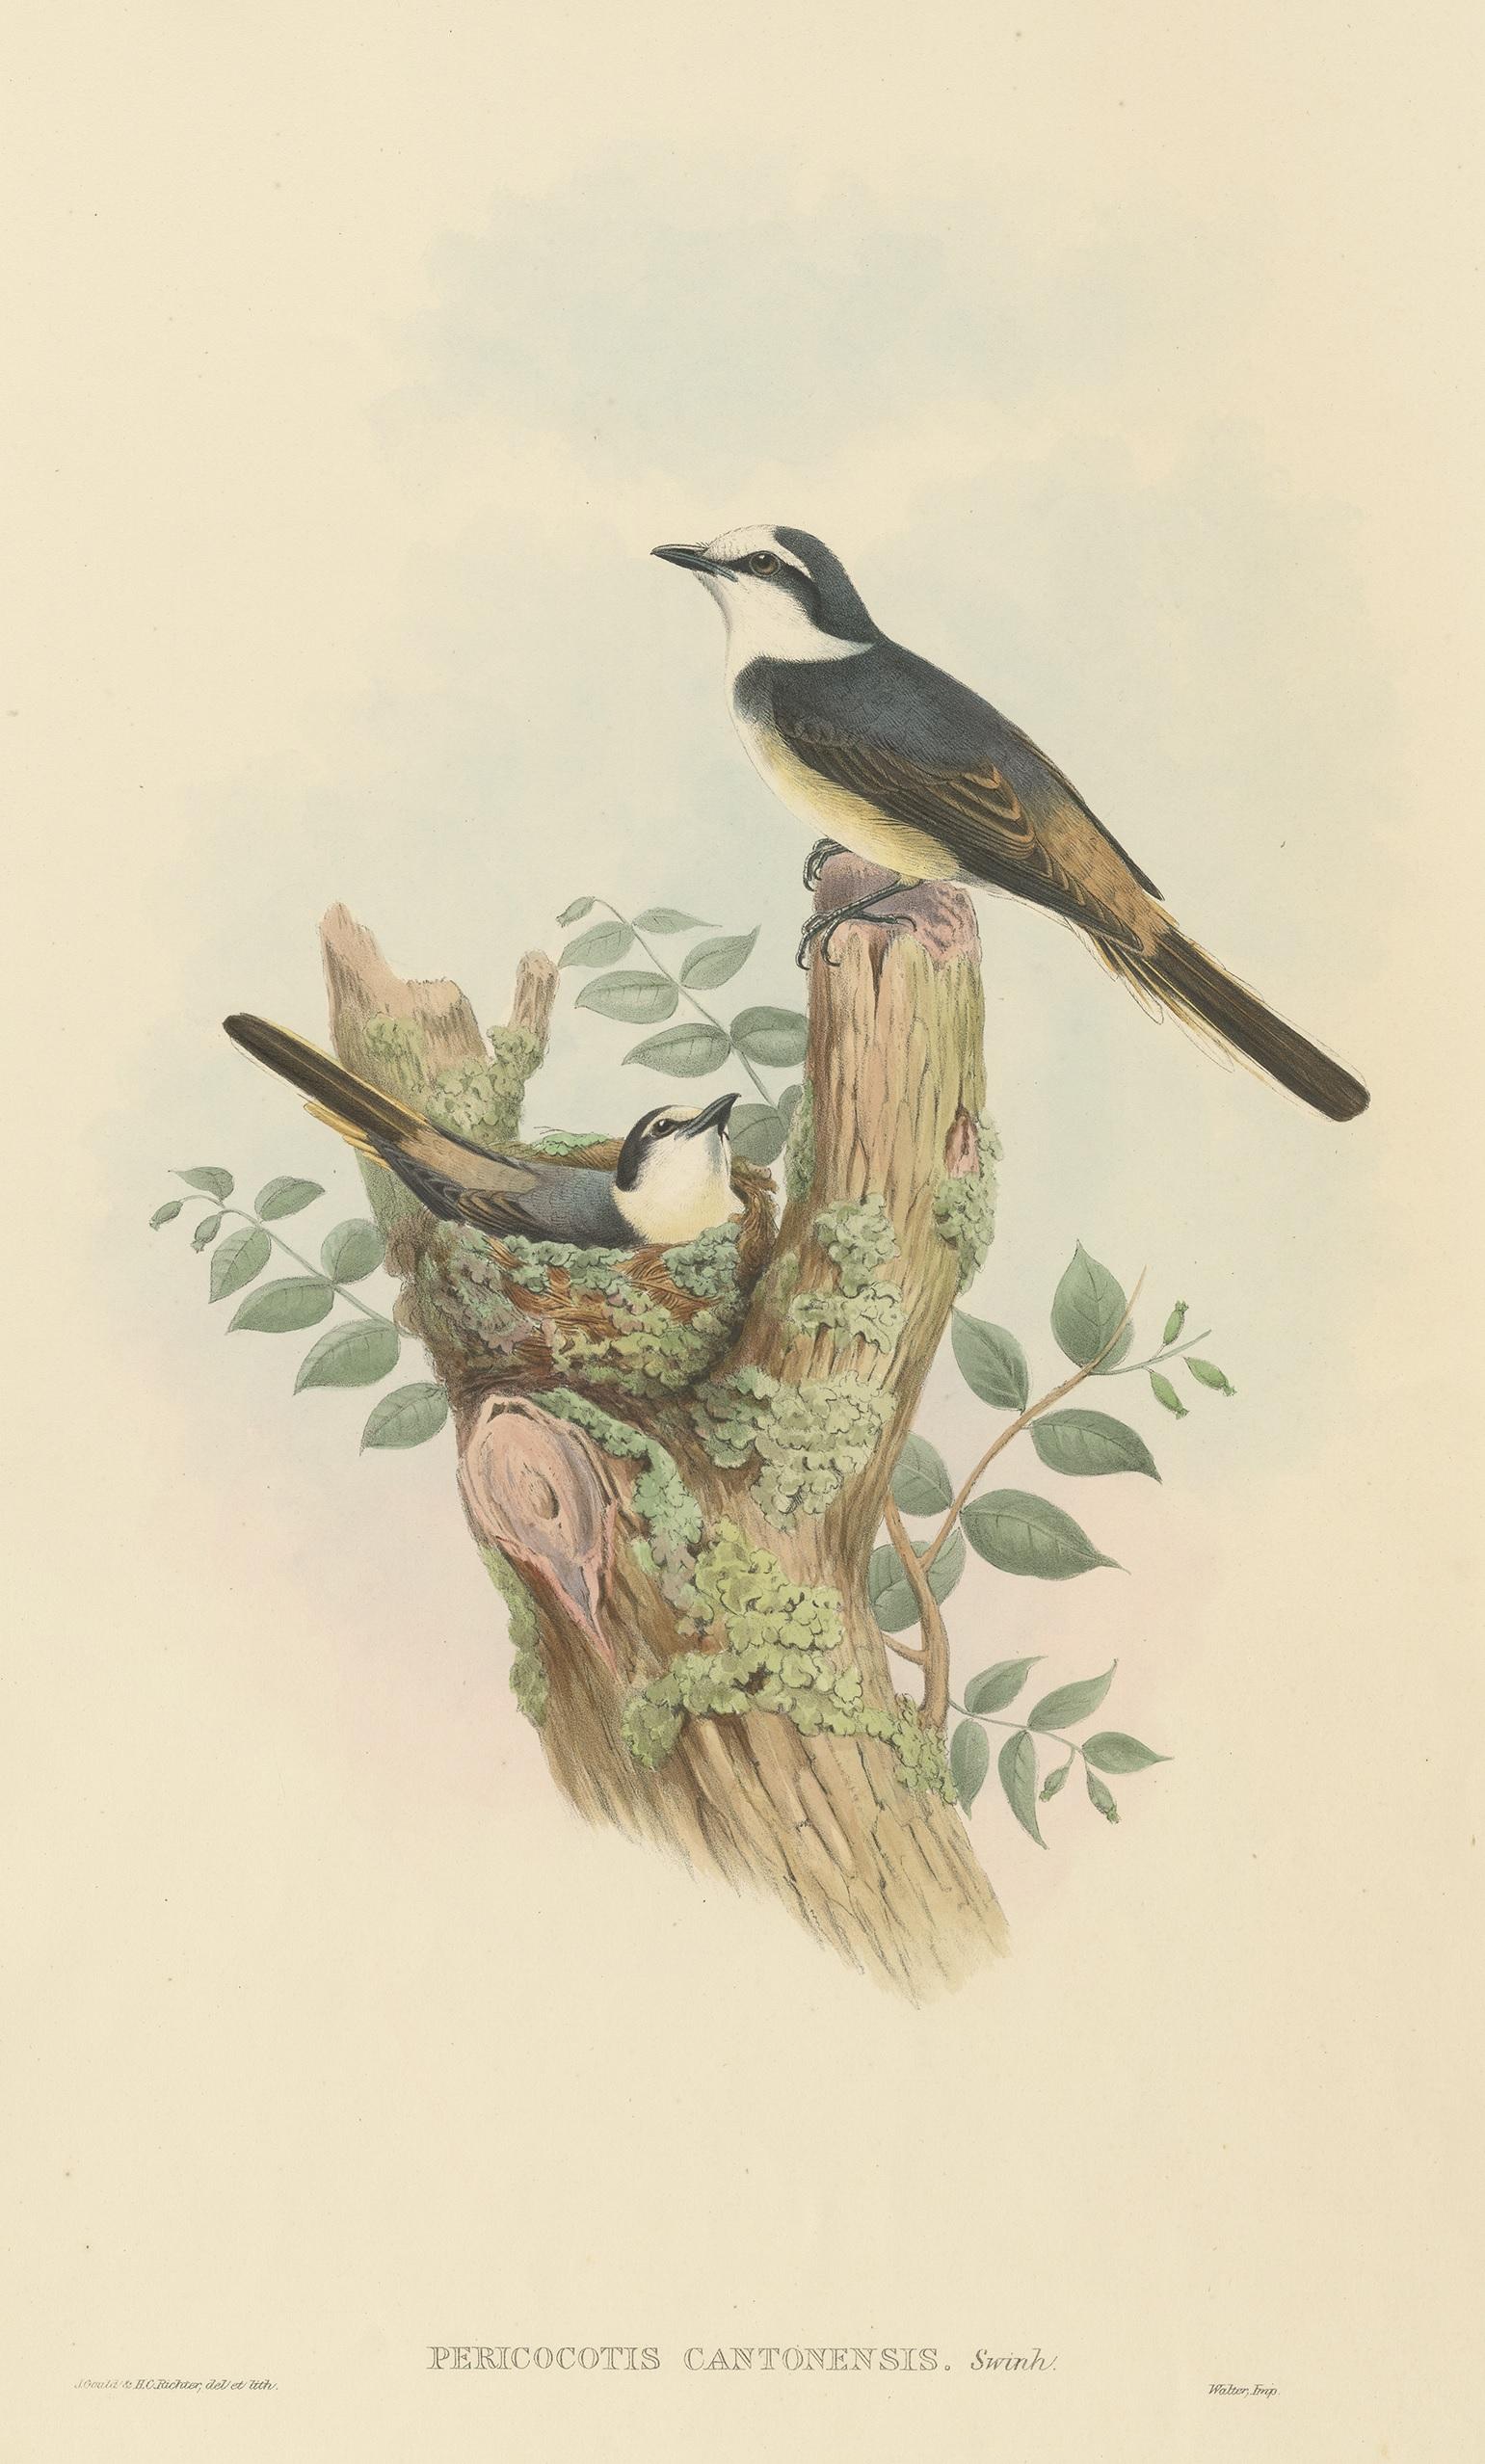 Antique bird print titled 'Pericocotis Cantonensis'. Original lithograph of the swinhoe's minivet. This print originates from 'Birds of Asia' by John Gould. Published 1850-1853.